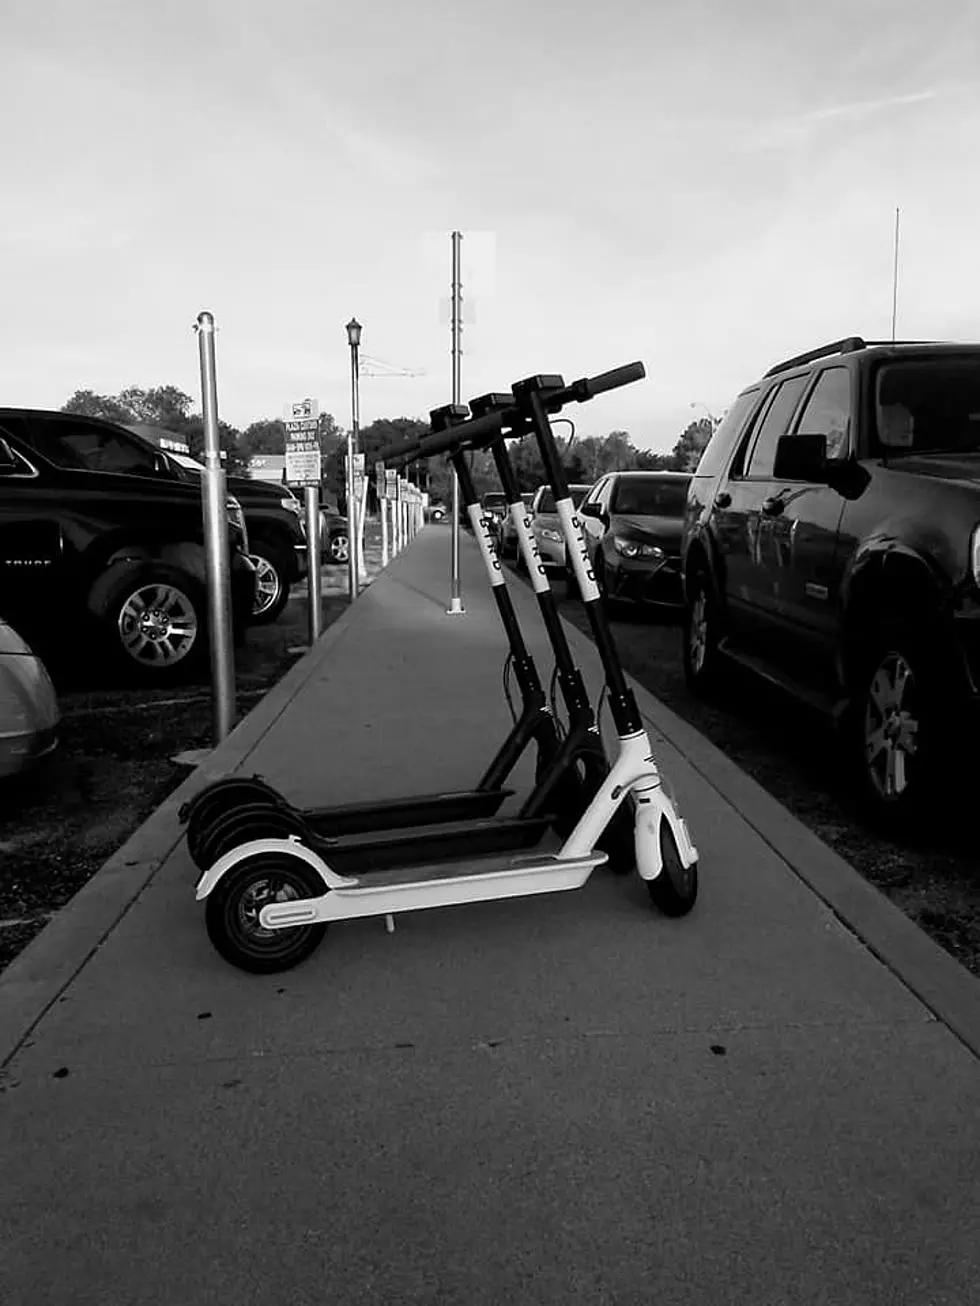 Bird Scooters Are Getting the Boot in Lubbock